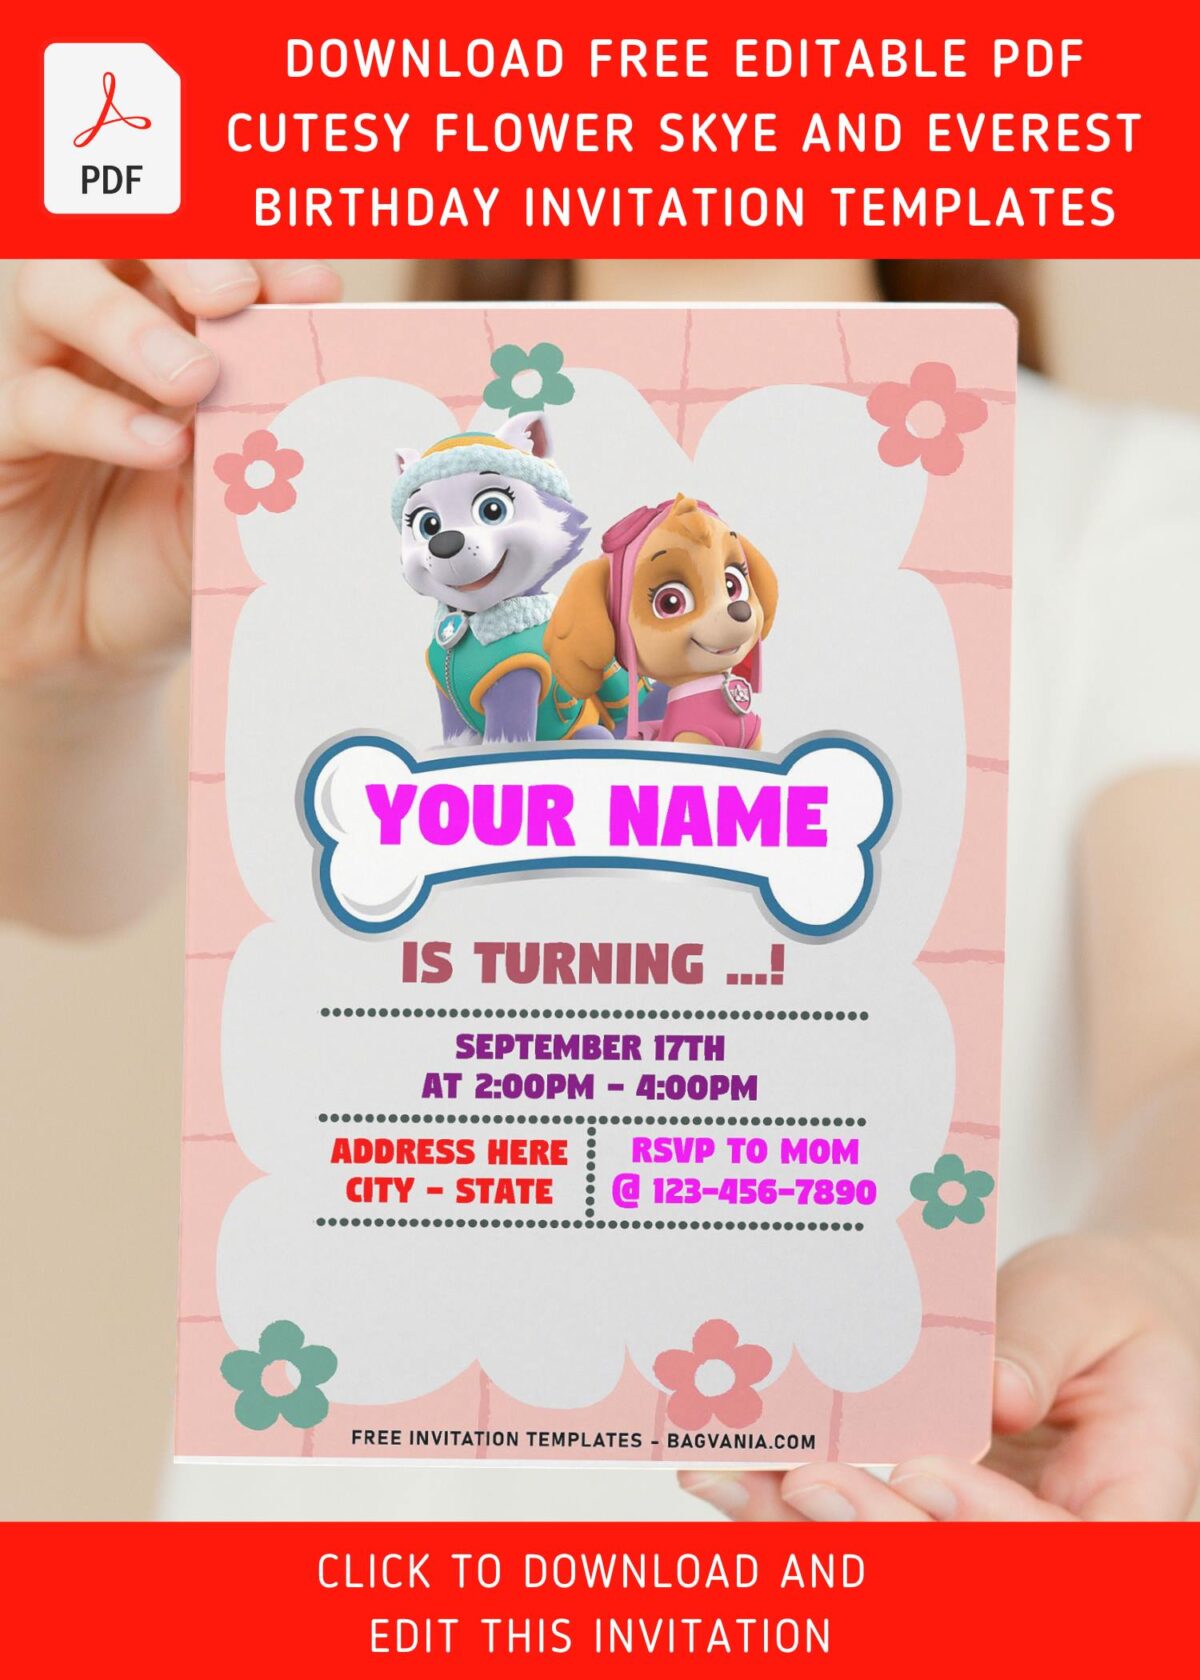 (Free Editable PDF) Quirky Cute Skye And Everest PAW Patrol Birthday Invitation Templates with pink background